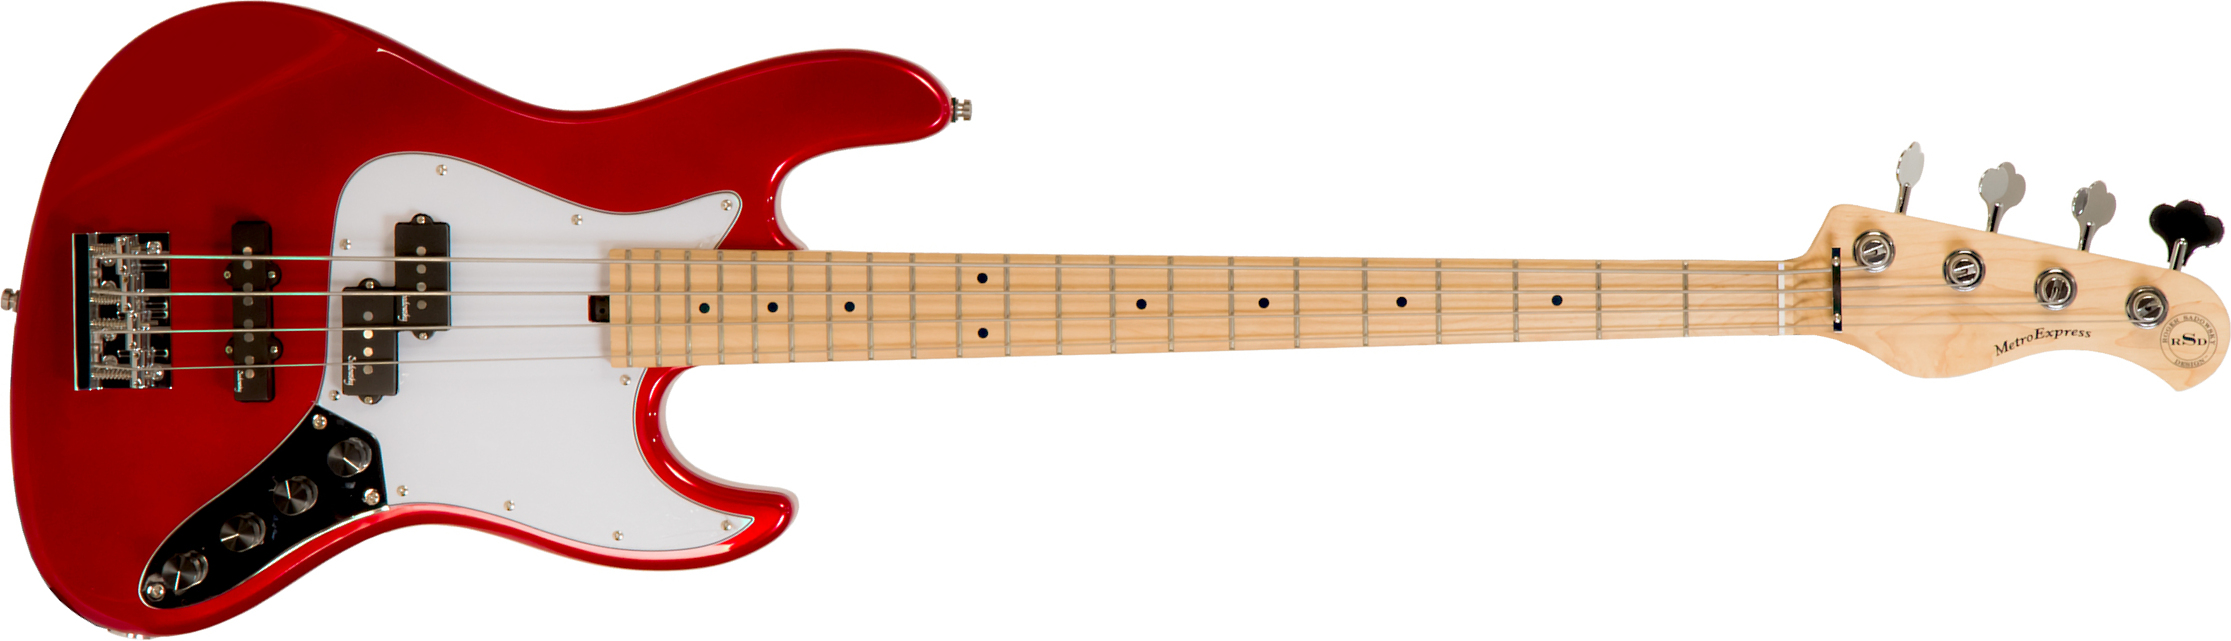 Sadowsky Hybrid P/j Bass 21 Fret 4c Metroexpress Mn - Candy Apple Red - Solid body electric bass - Main picture